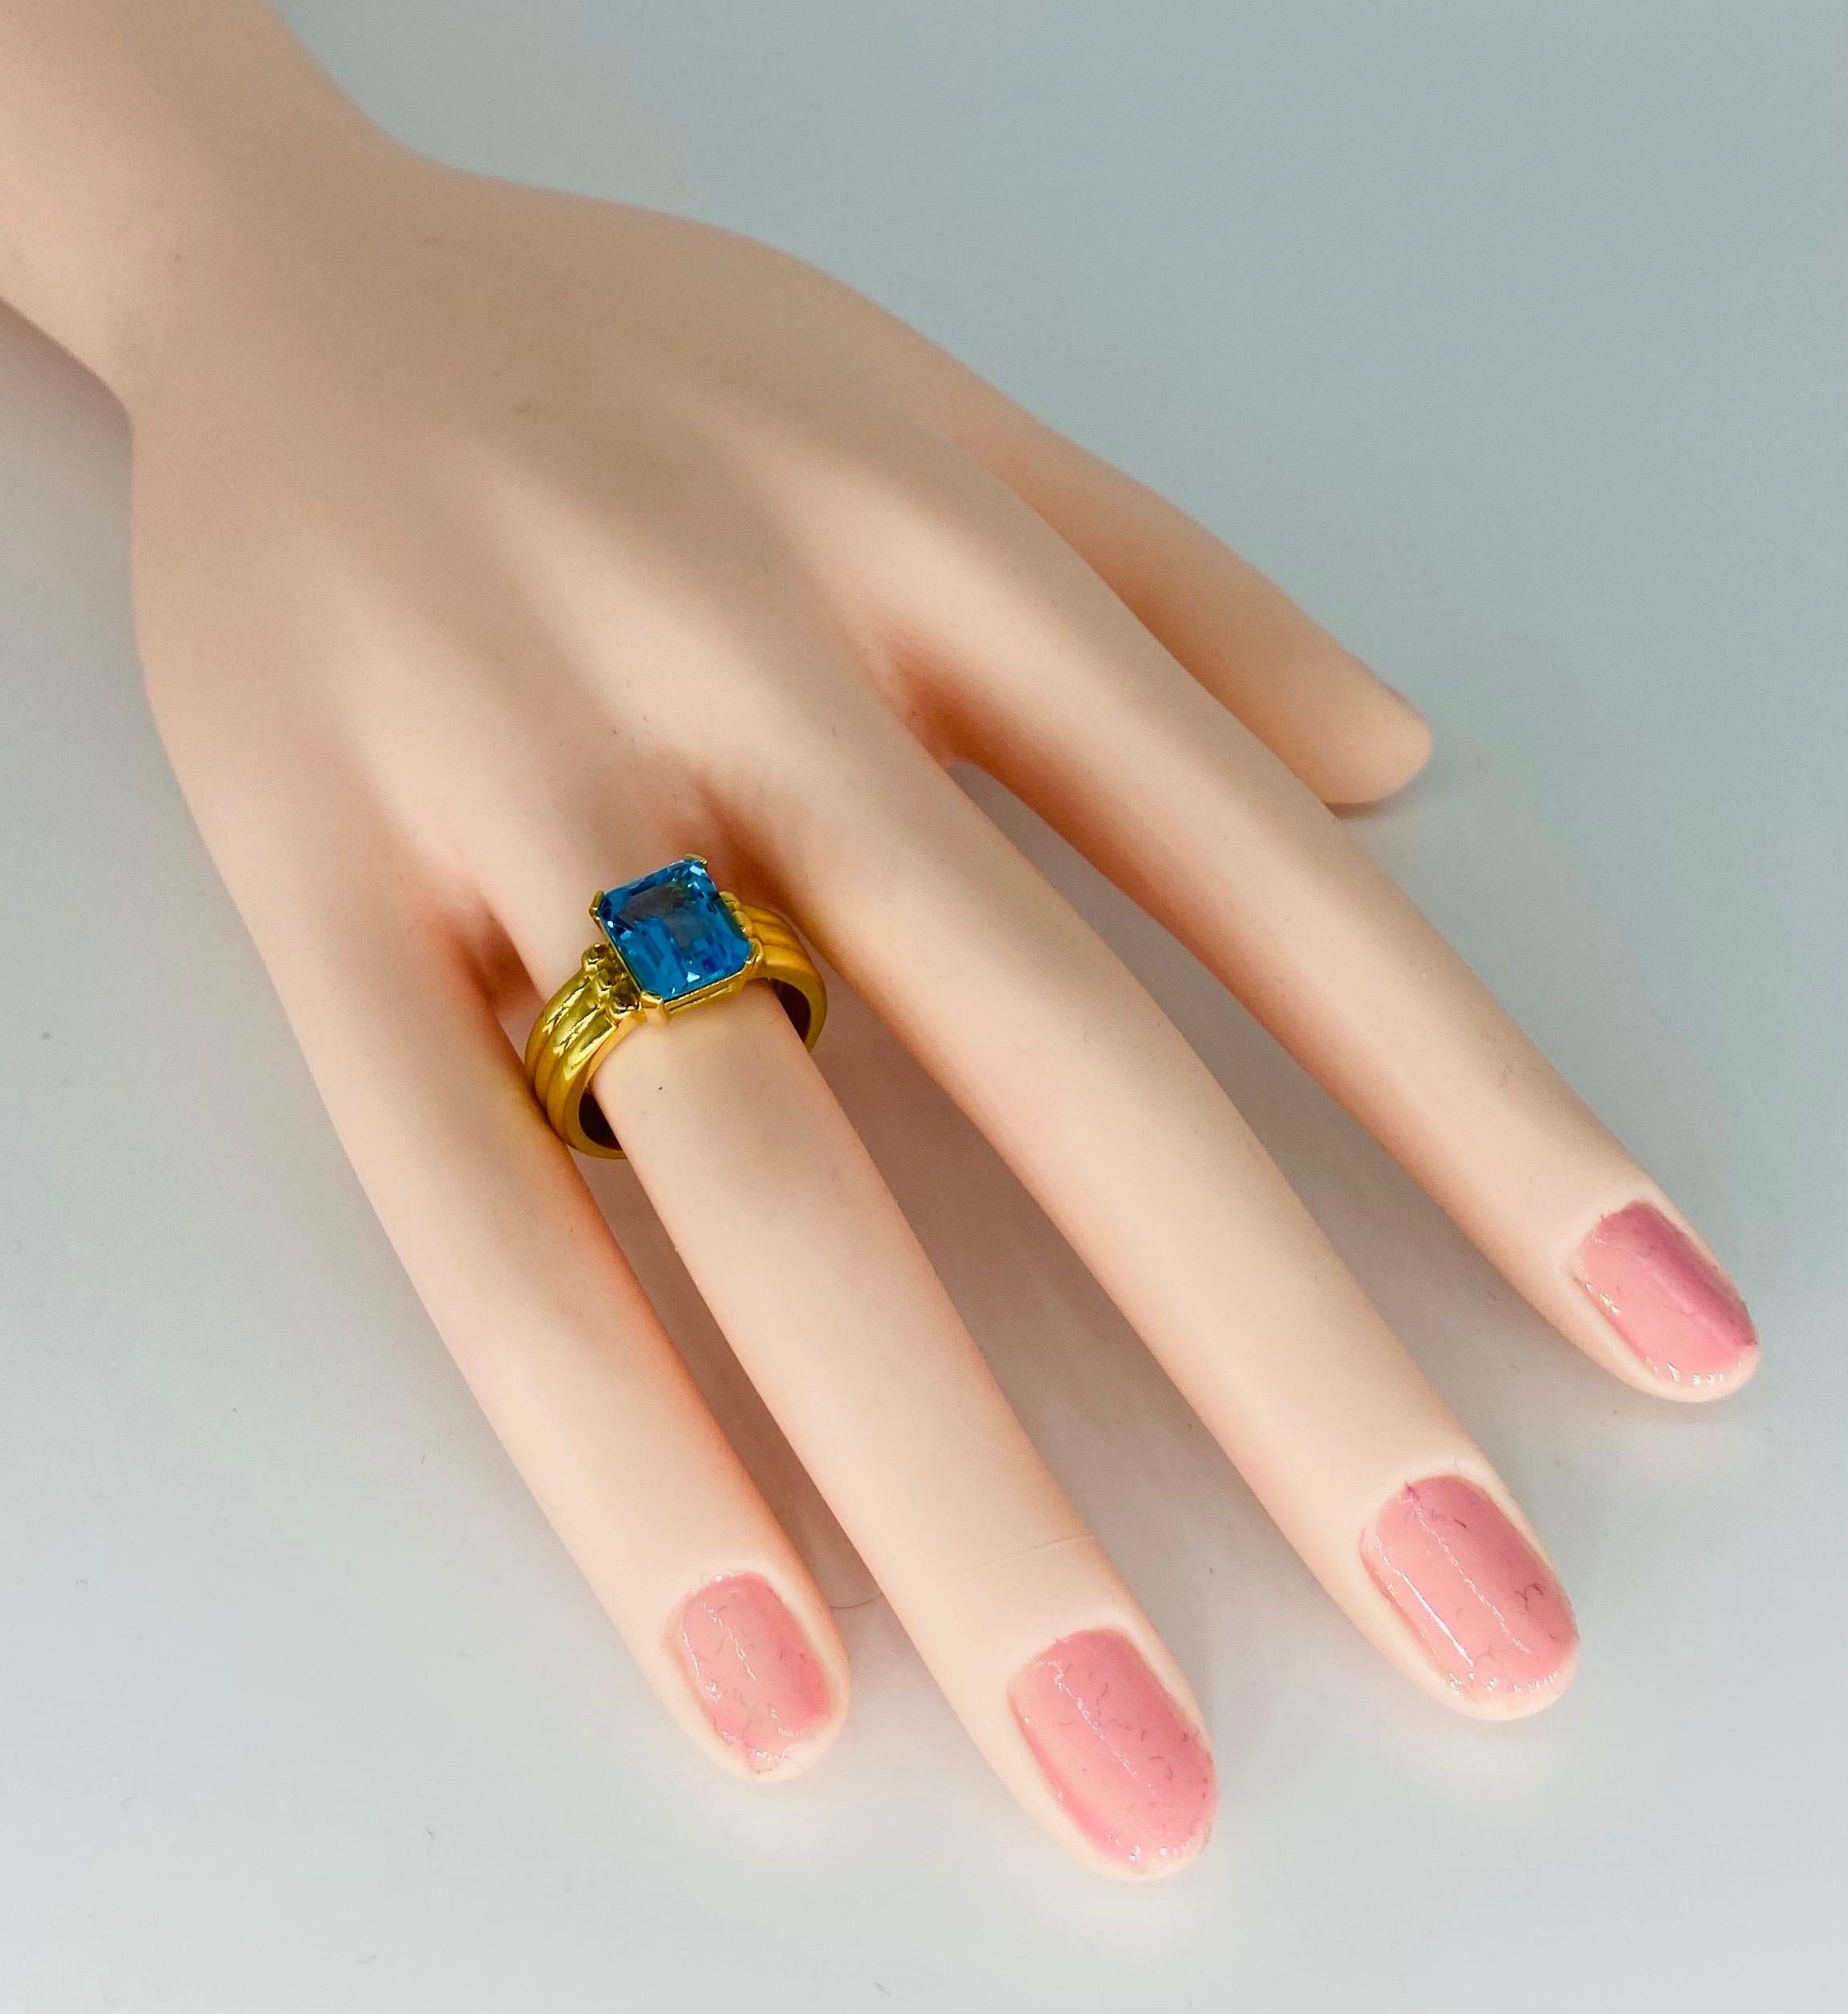 Vintage high quality 3 Carat Blue Topaz Emerald Emerald Cut Ring 18k Gold. The ring features a center 3 carat blue topaz measuring 10mm X 8mm and is a size 7.5
The ring is made in 18k solid gold weighting approx 7.5 grams 